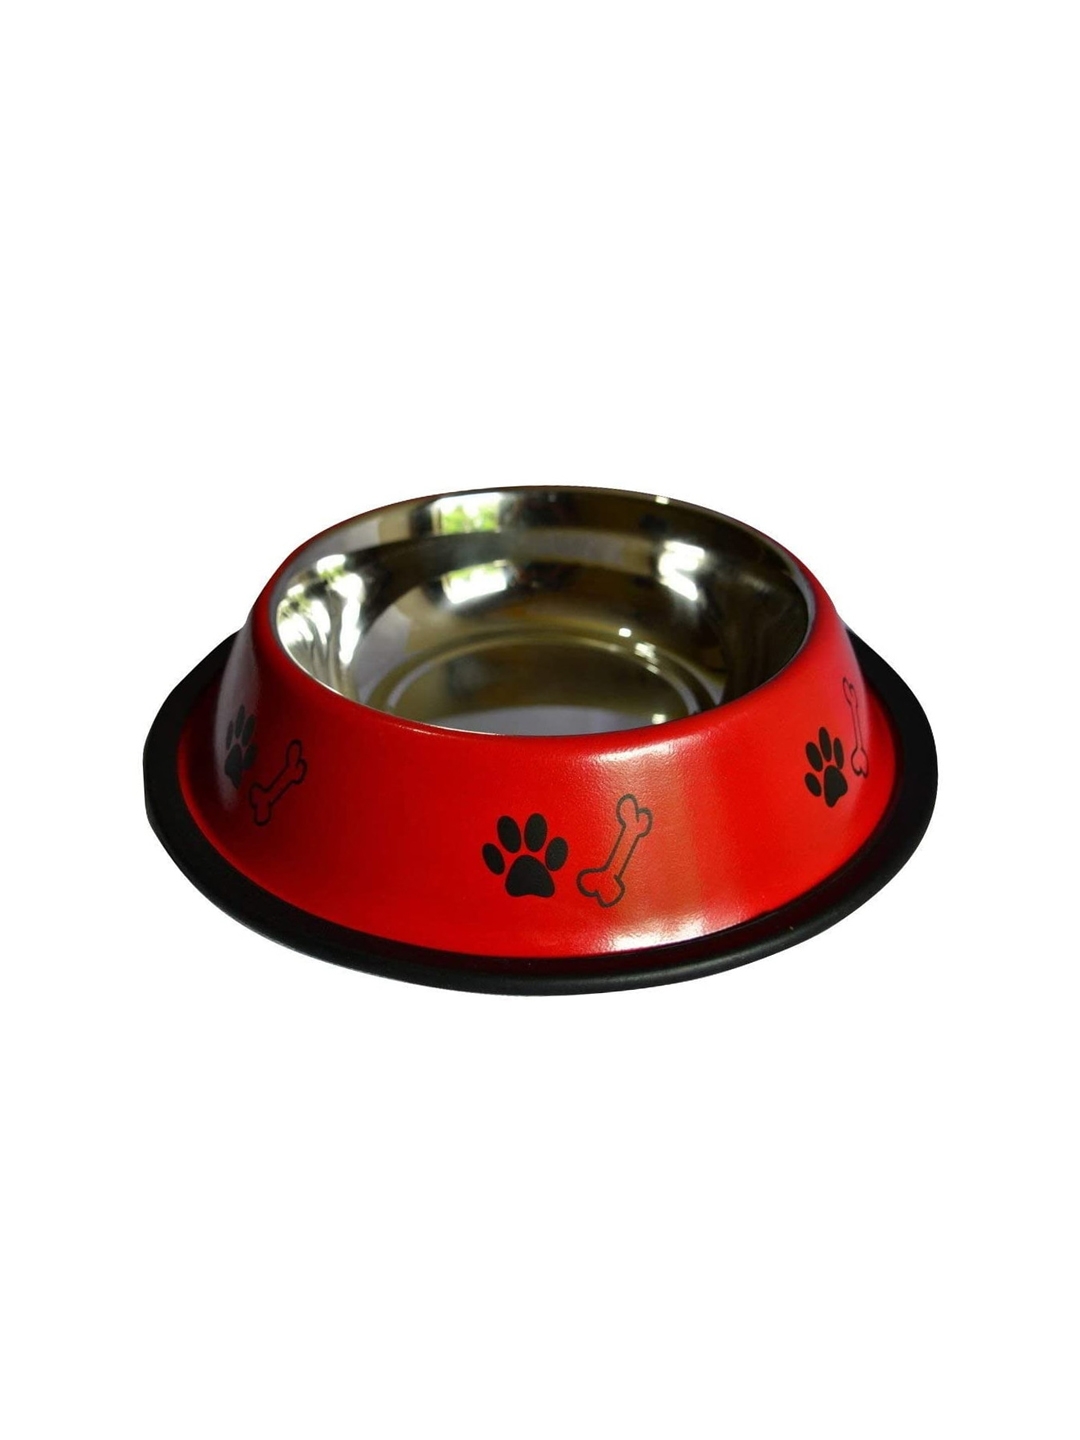 Emily pets Red   Black Printed Stainless Steel Dog Bowl